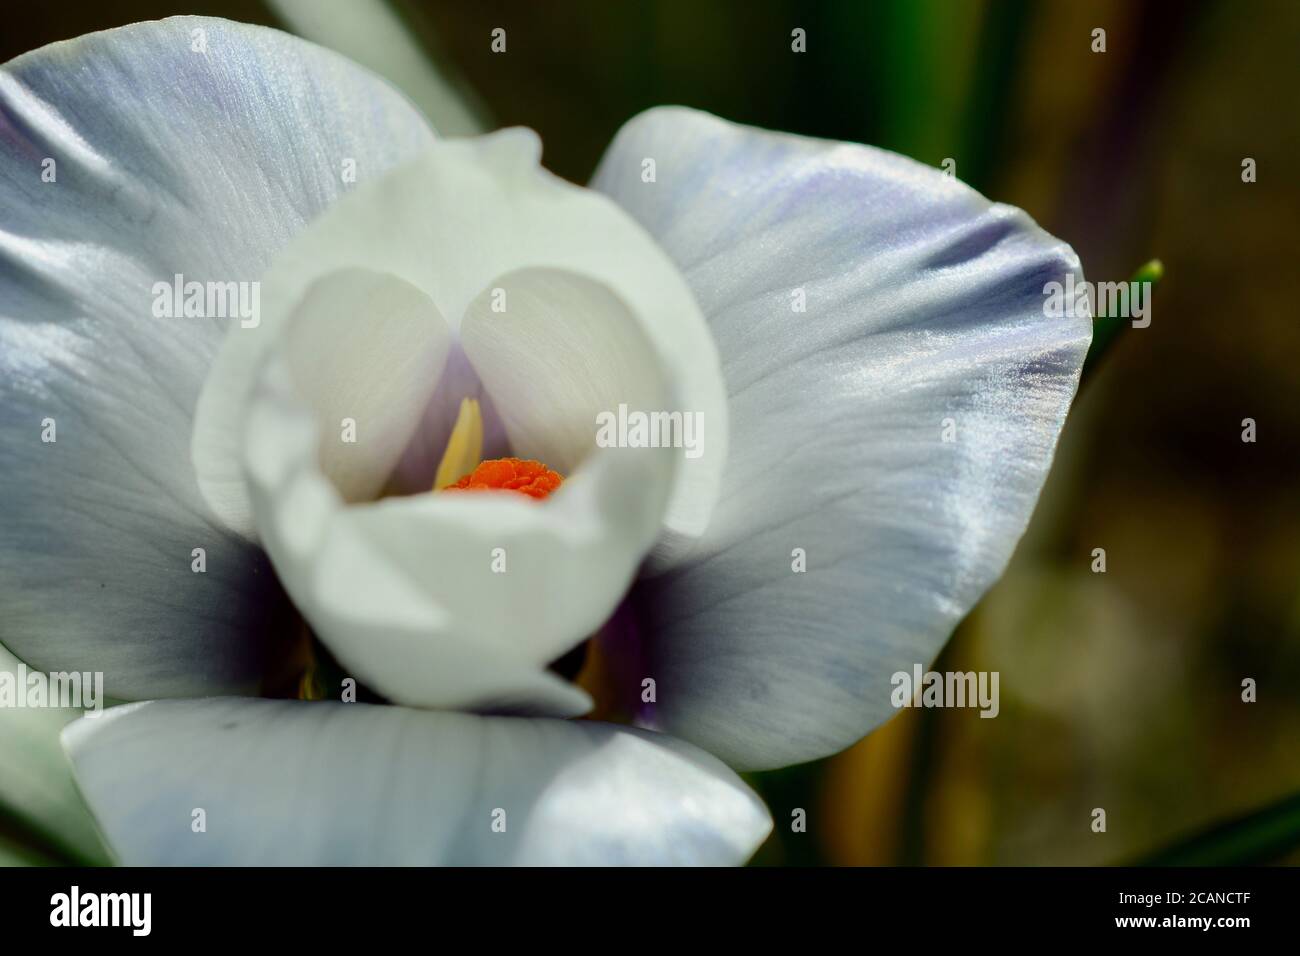 A close-up photo of a beautiful garden crocus flower (Iridaceae family), backlit on dark background. Shallow depth of field. Stock Photo